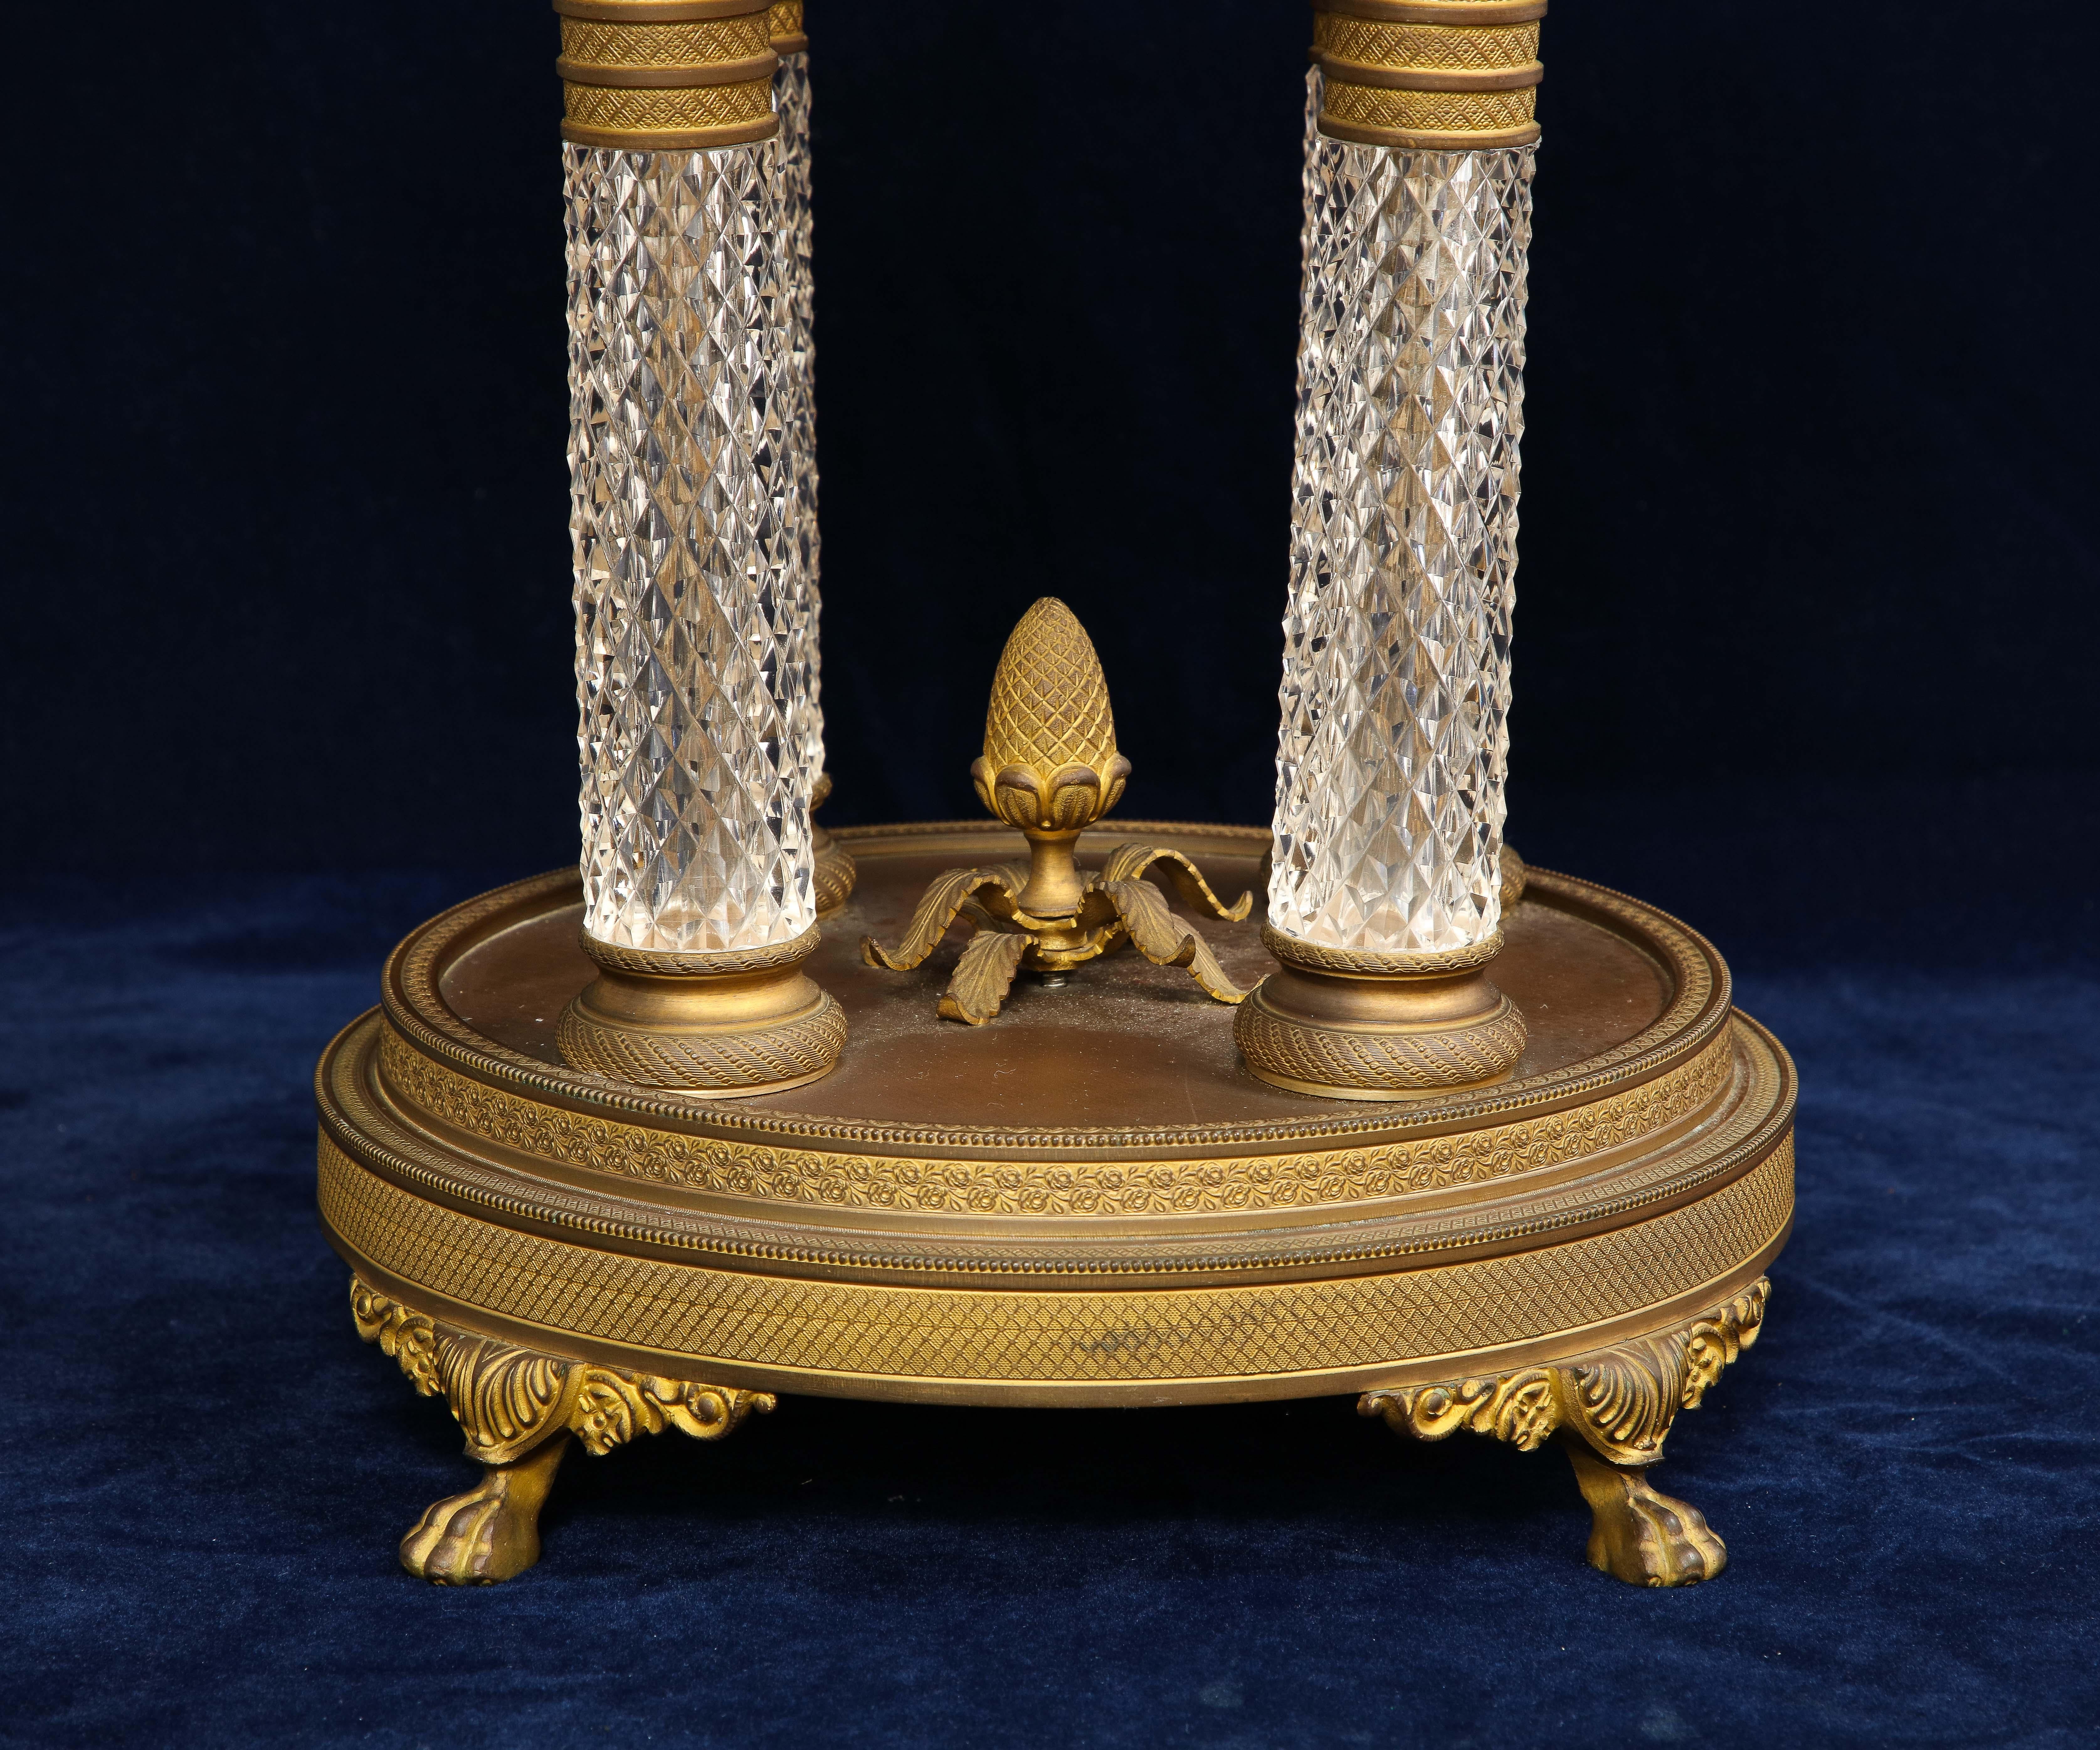 19th Century French Baccarat Ormolu Mounted Crystal Centerpiece In Good Condition For Sale In New York, NY